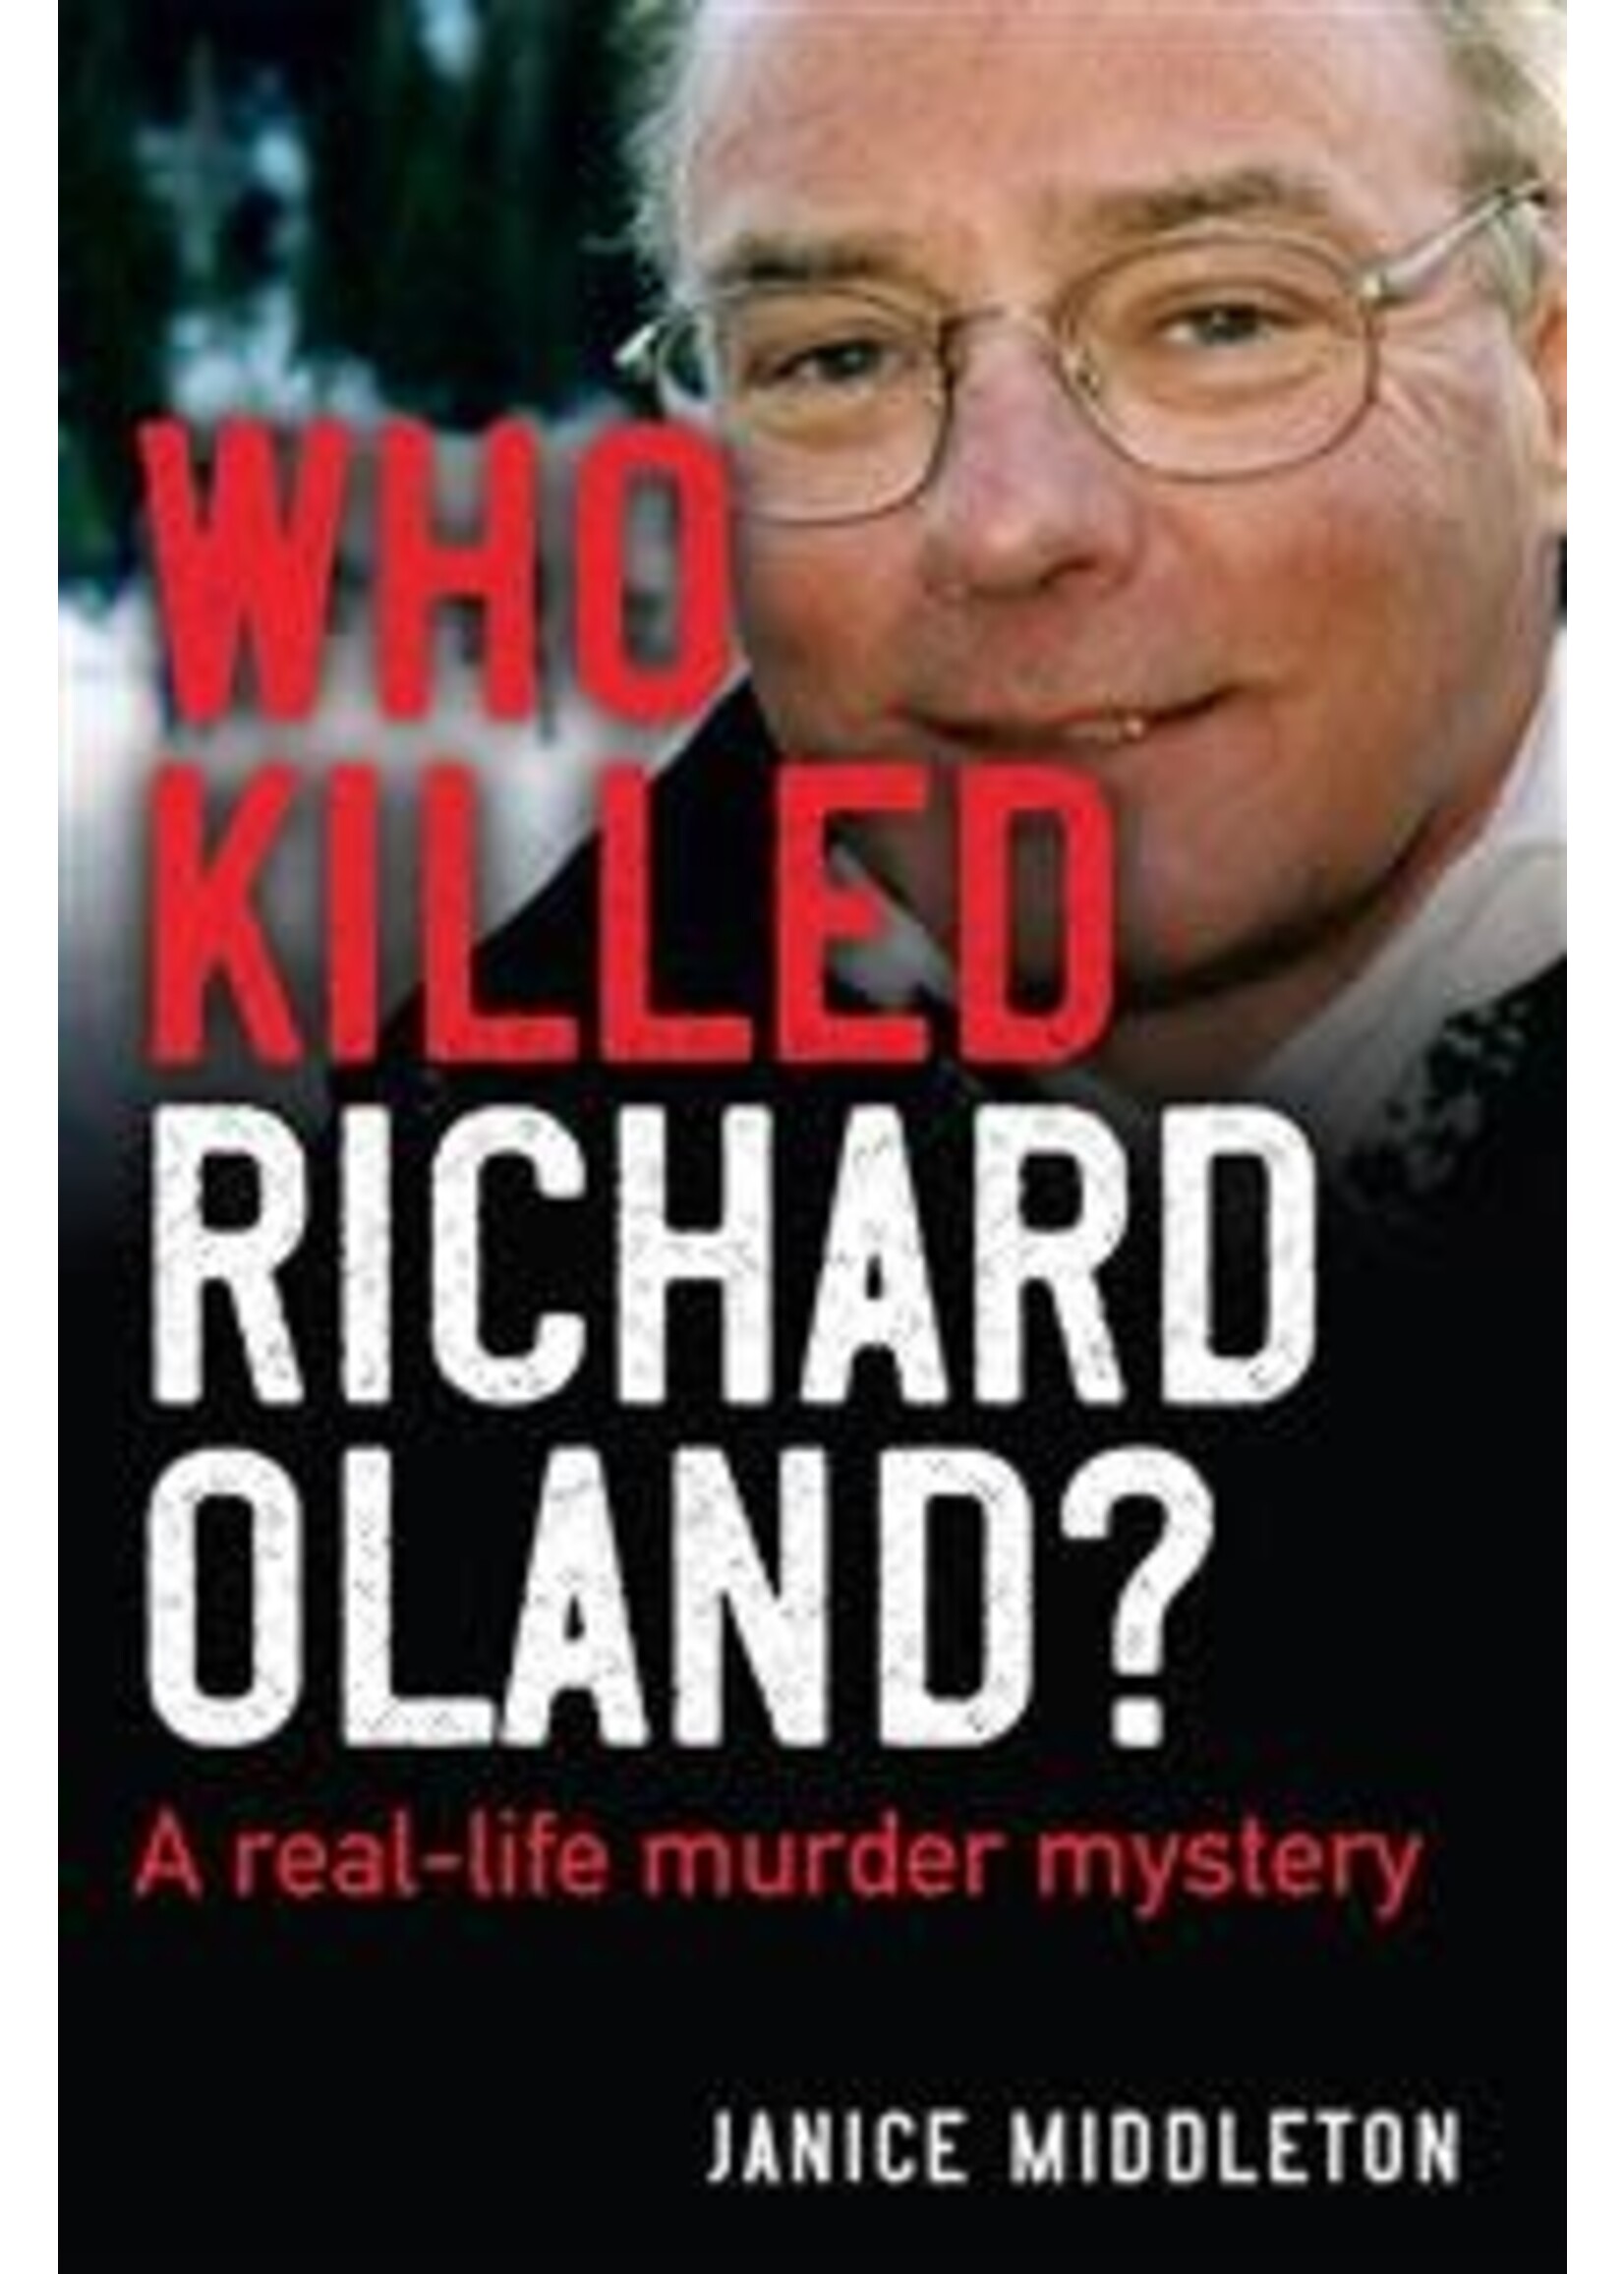 Who Killed Richard Oland?: A real-life murder mystery by Janice Middleton